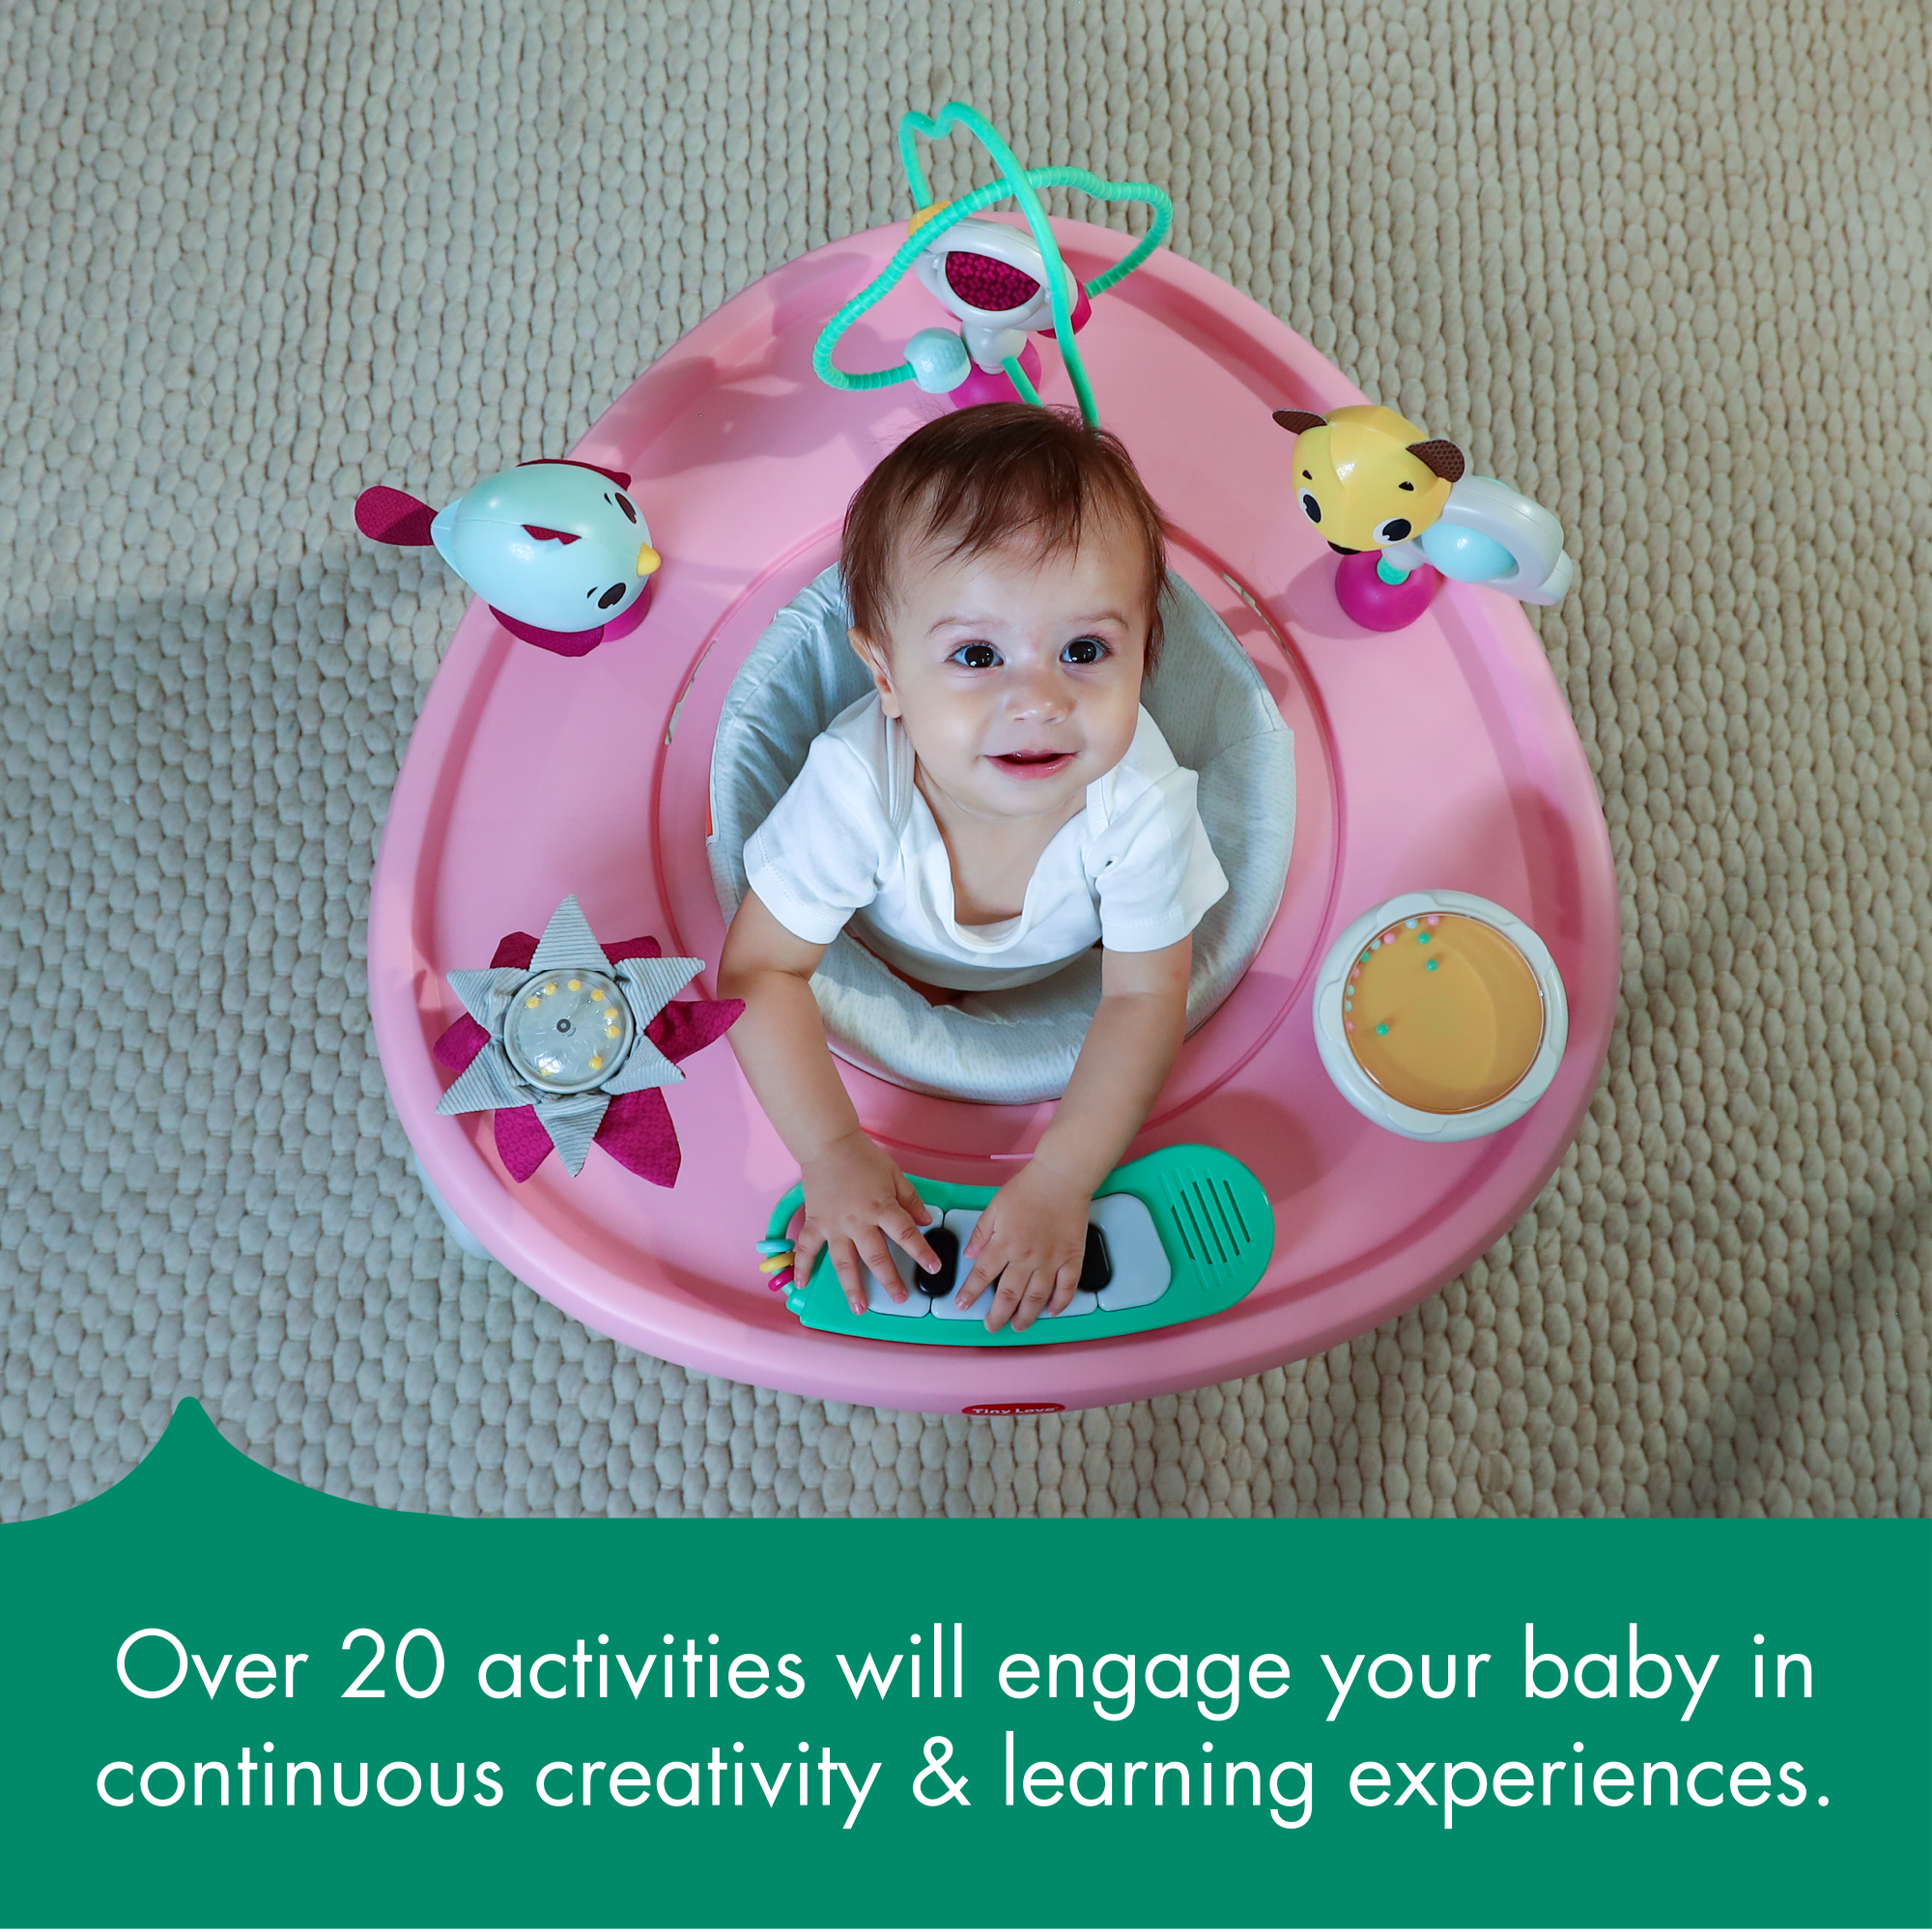 Tiny Love 5-in-1 Here I Grow Stationary Activity Center - over 20 activities will engage your baby in continuous creativity & learning experiences